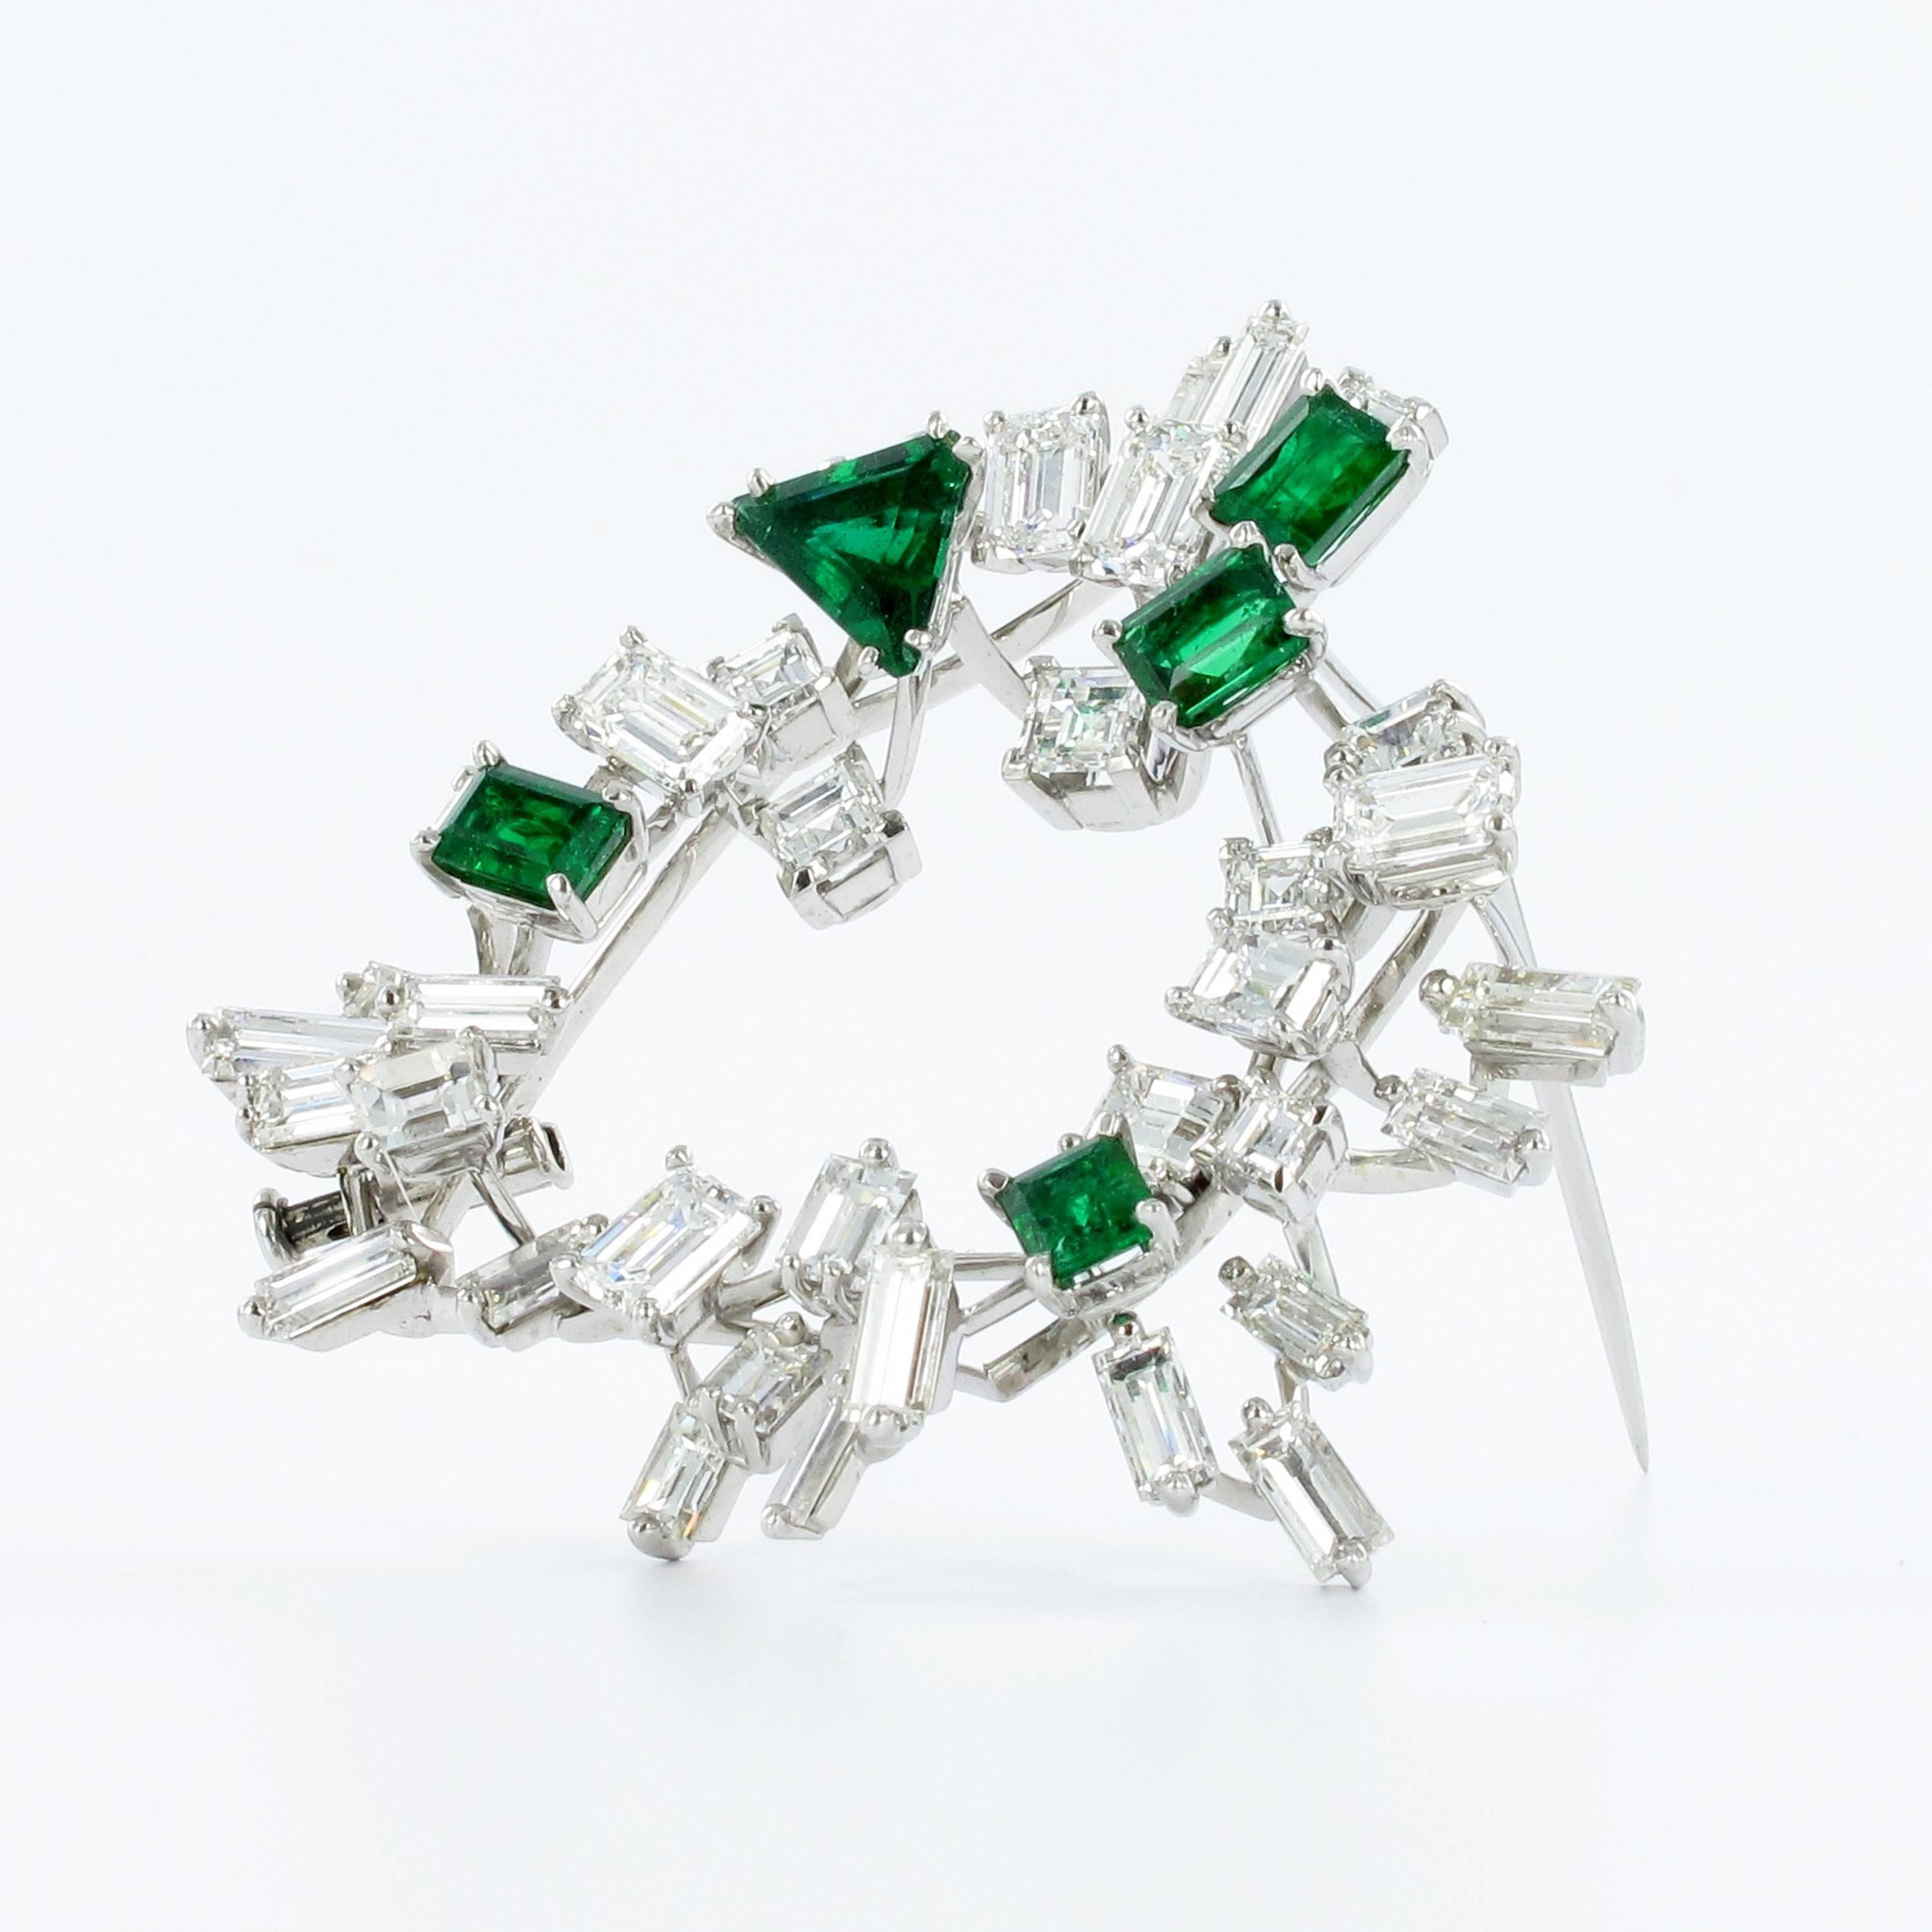 Contemporary Emerald and Diamond Cluster Brooch by Meister